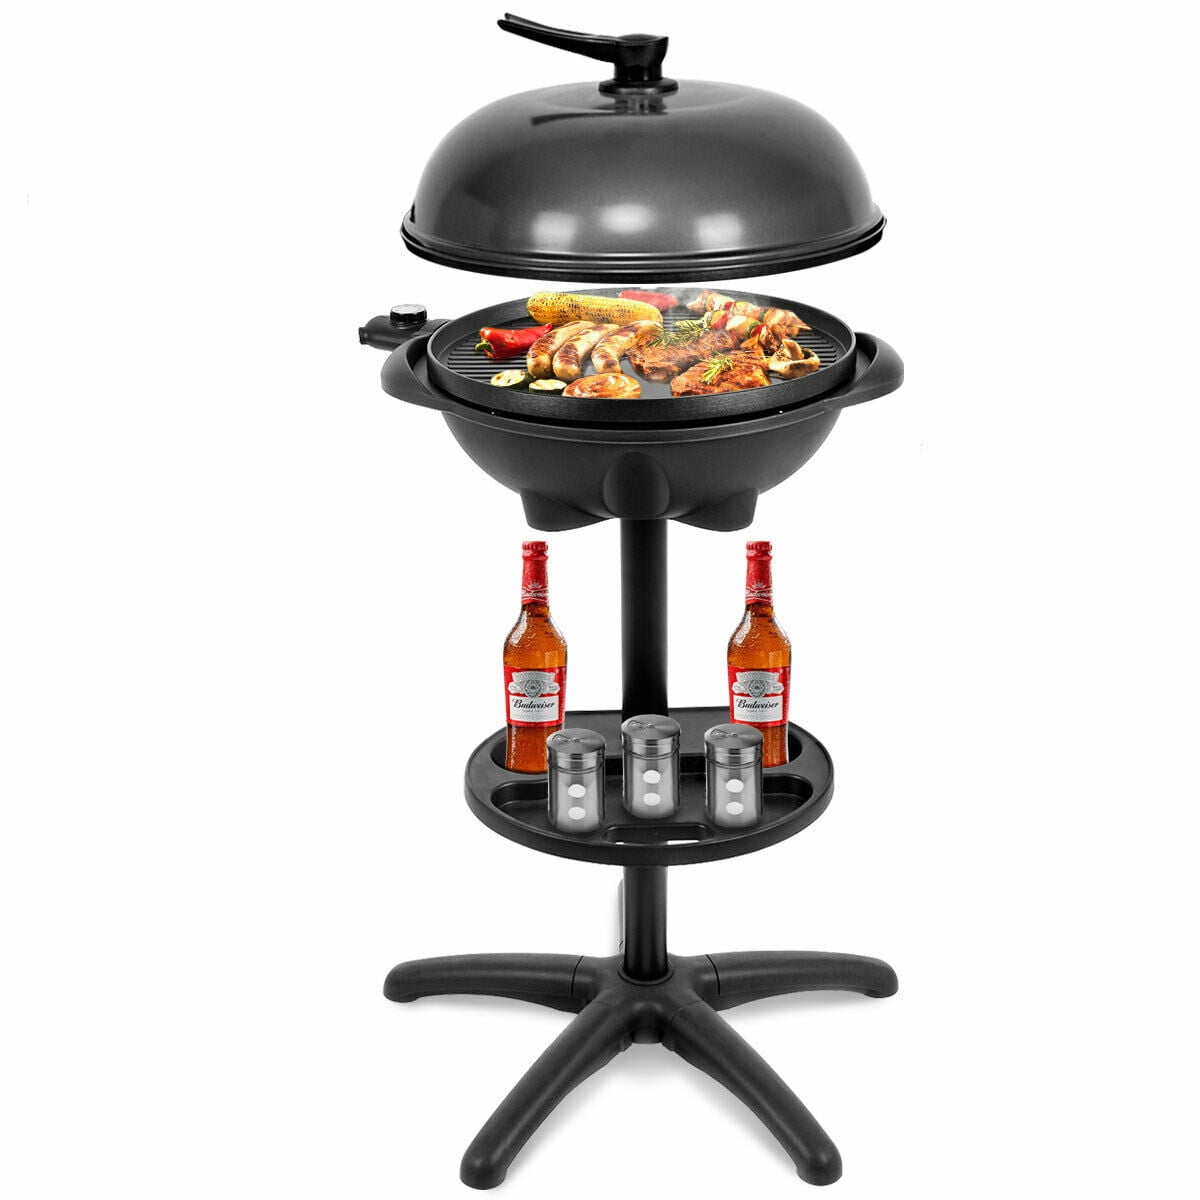 Barbecue WEEKEND Grill Pivotante F100 